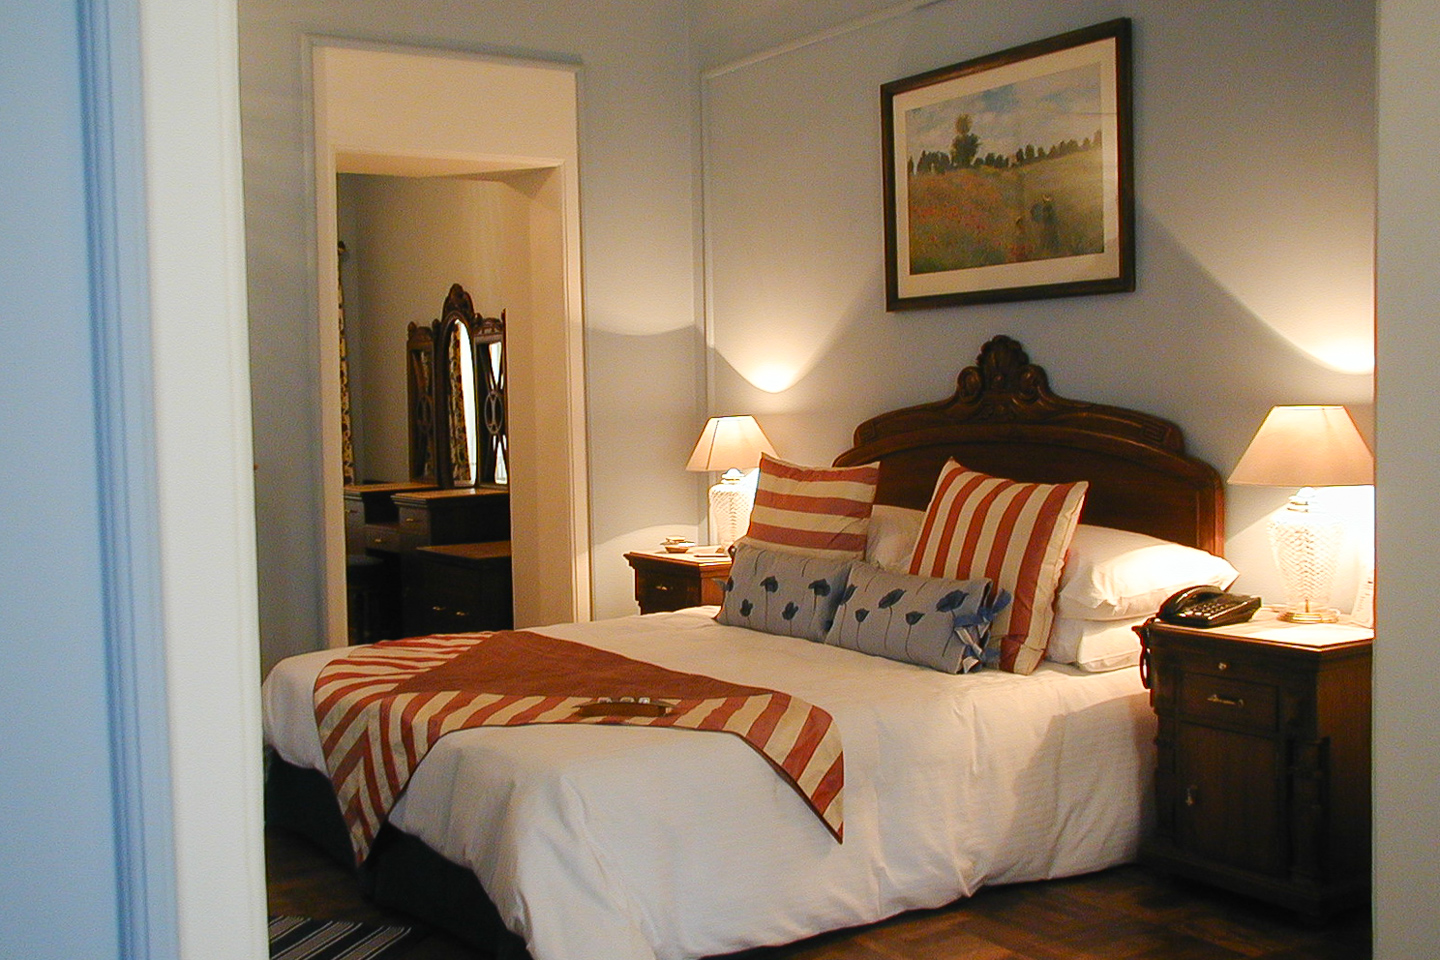 The blue guest room has pale blue walls with white highlights.